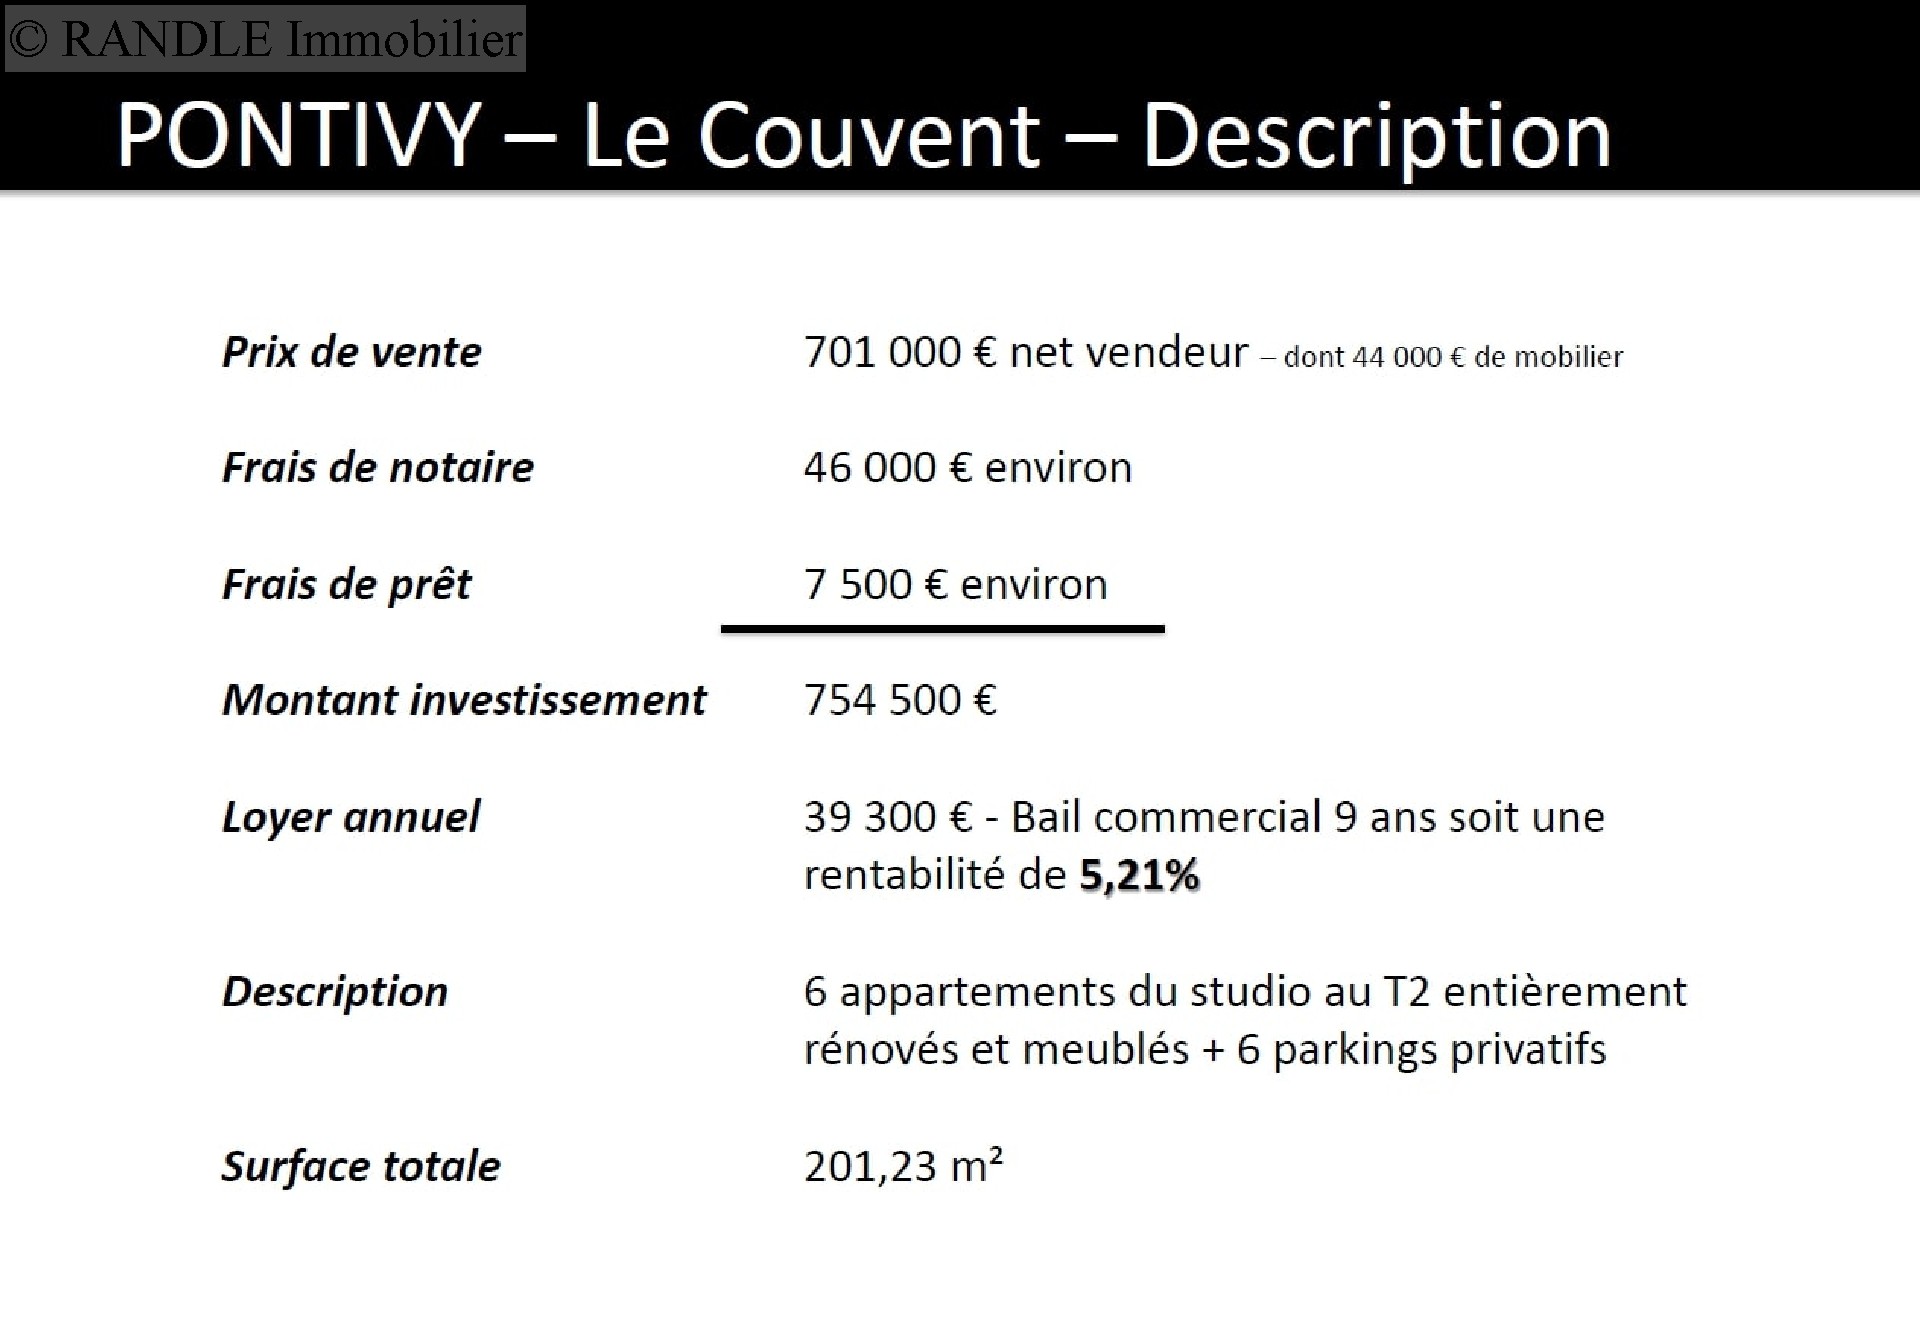 Sell building - PONTIVY 201 m², 12 rooms